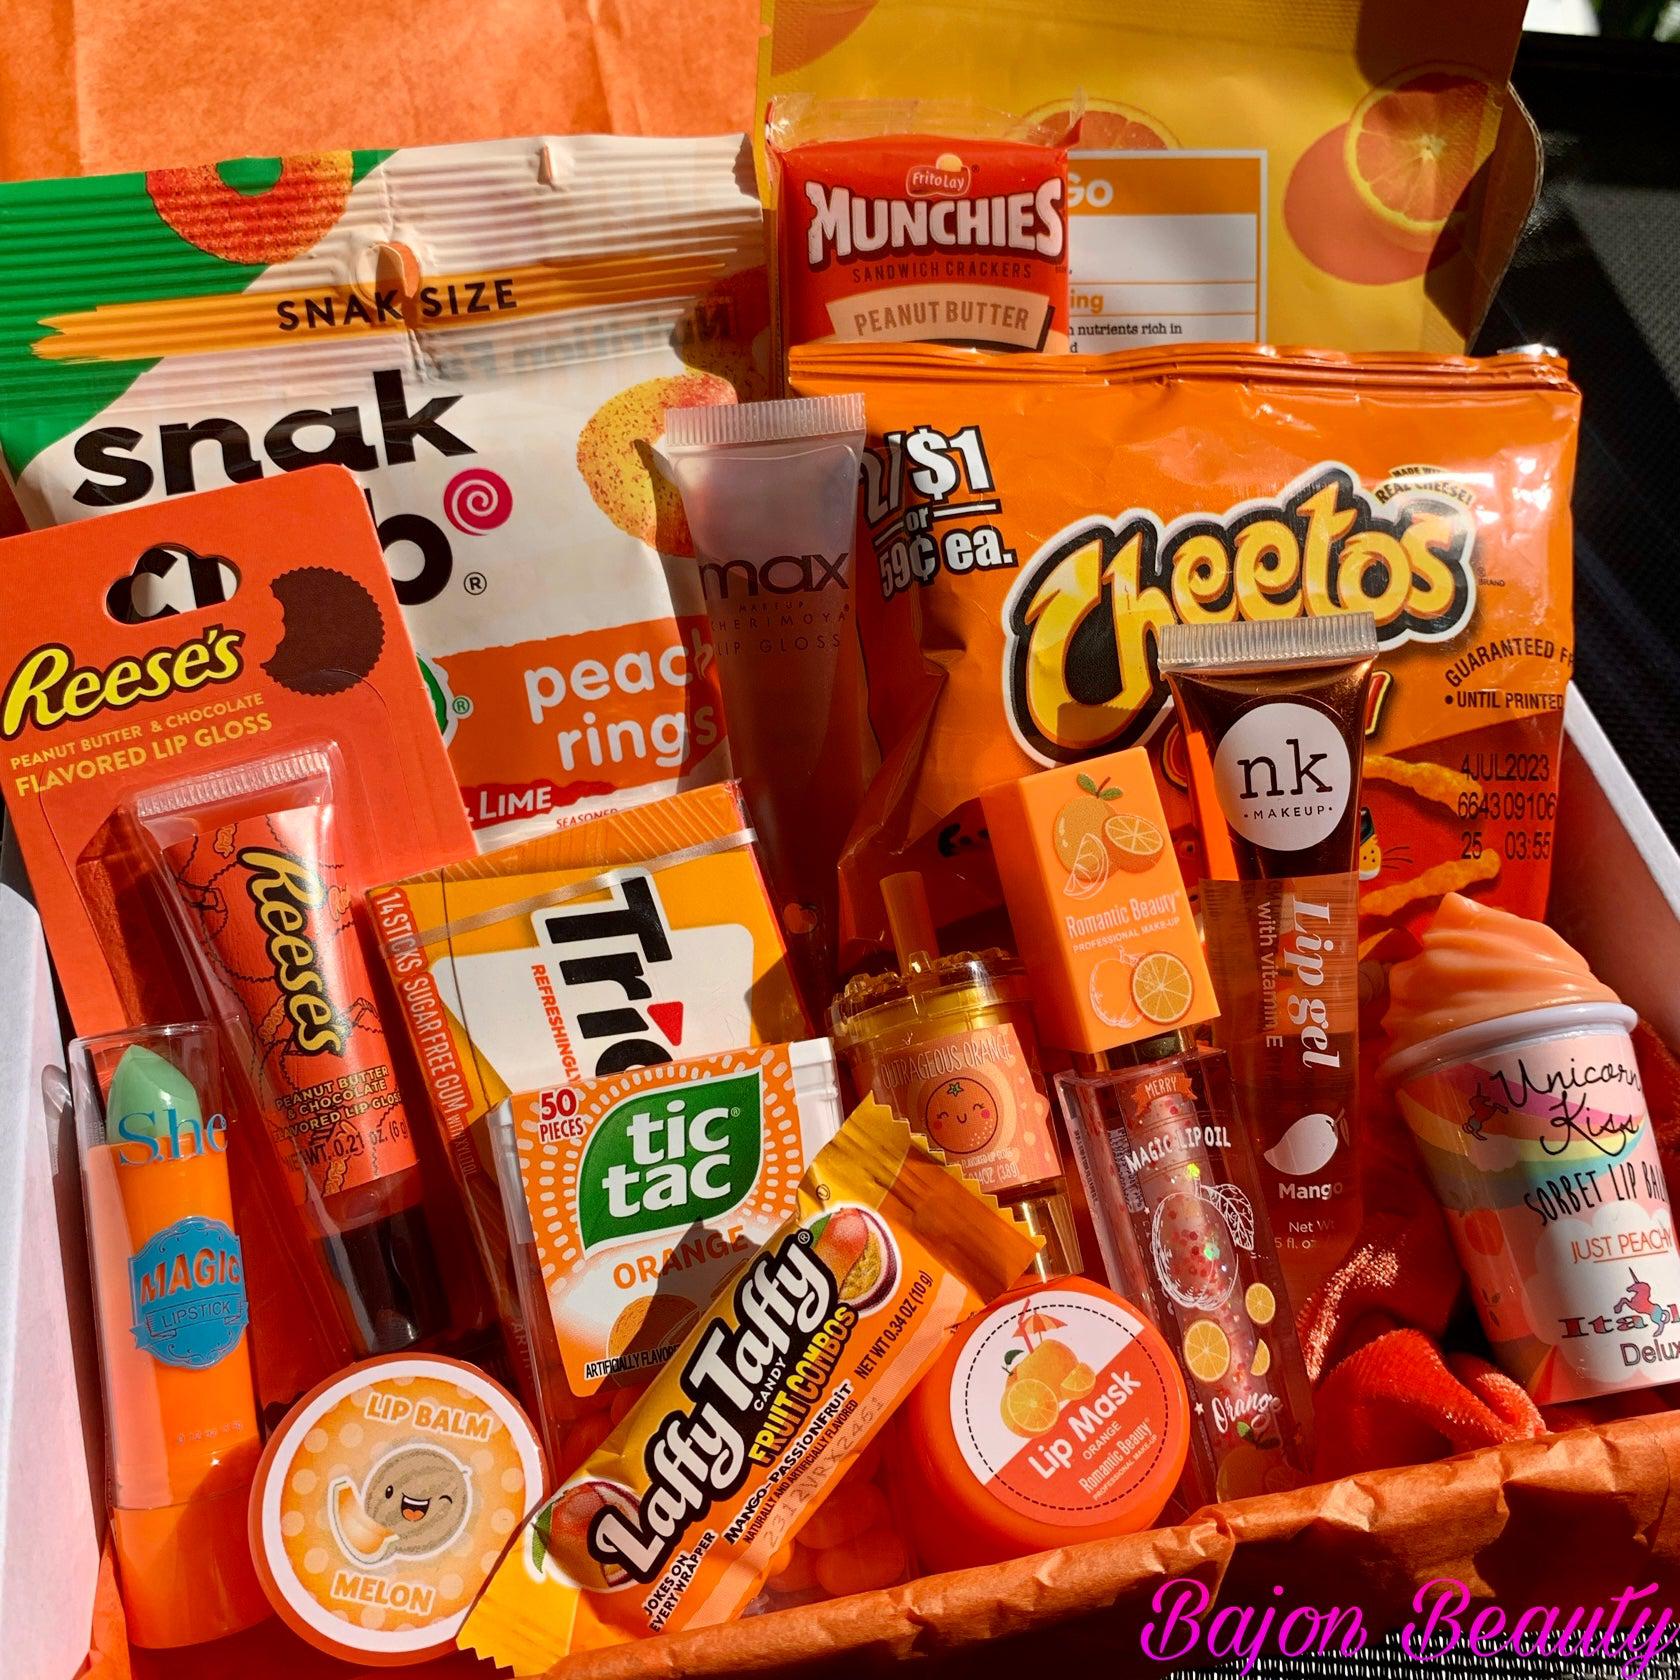 Pink Lip Gloss Snack Box Gift Set in 2023